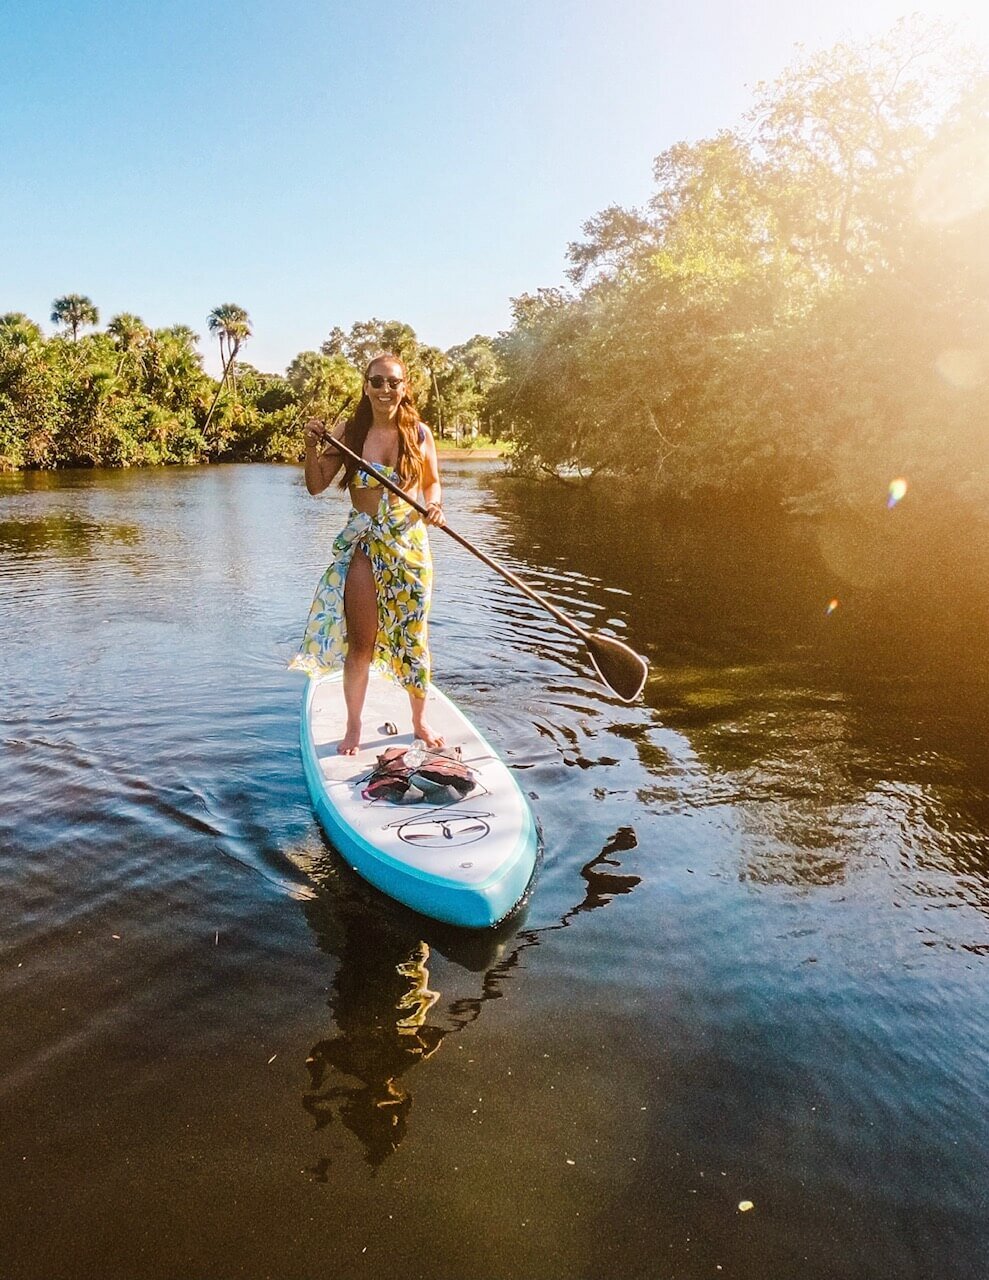 Valerie Trusted Travel Girl stand up paddle boarding in St Lucie River Best Things to Do in Stuart, Jensen Beach, and Martin County, Florida